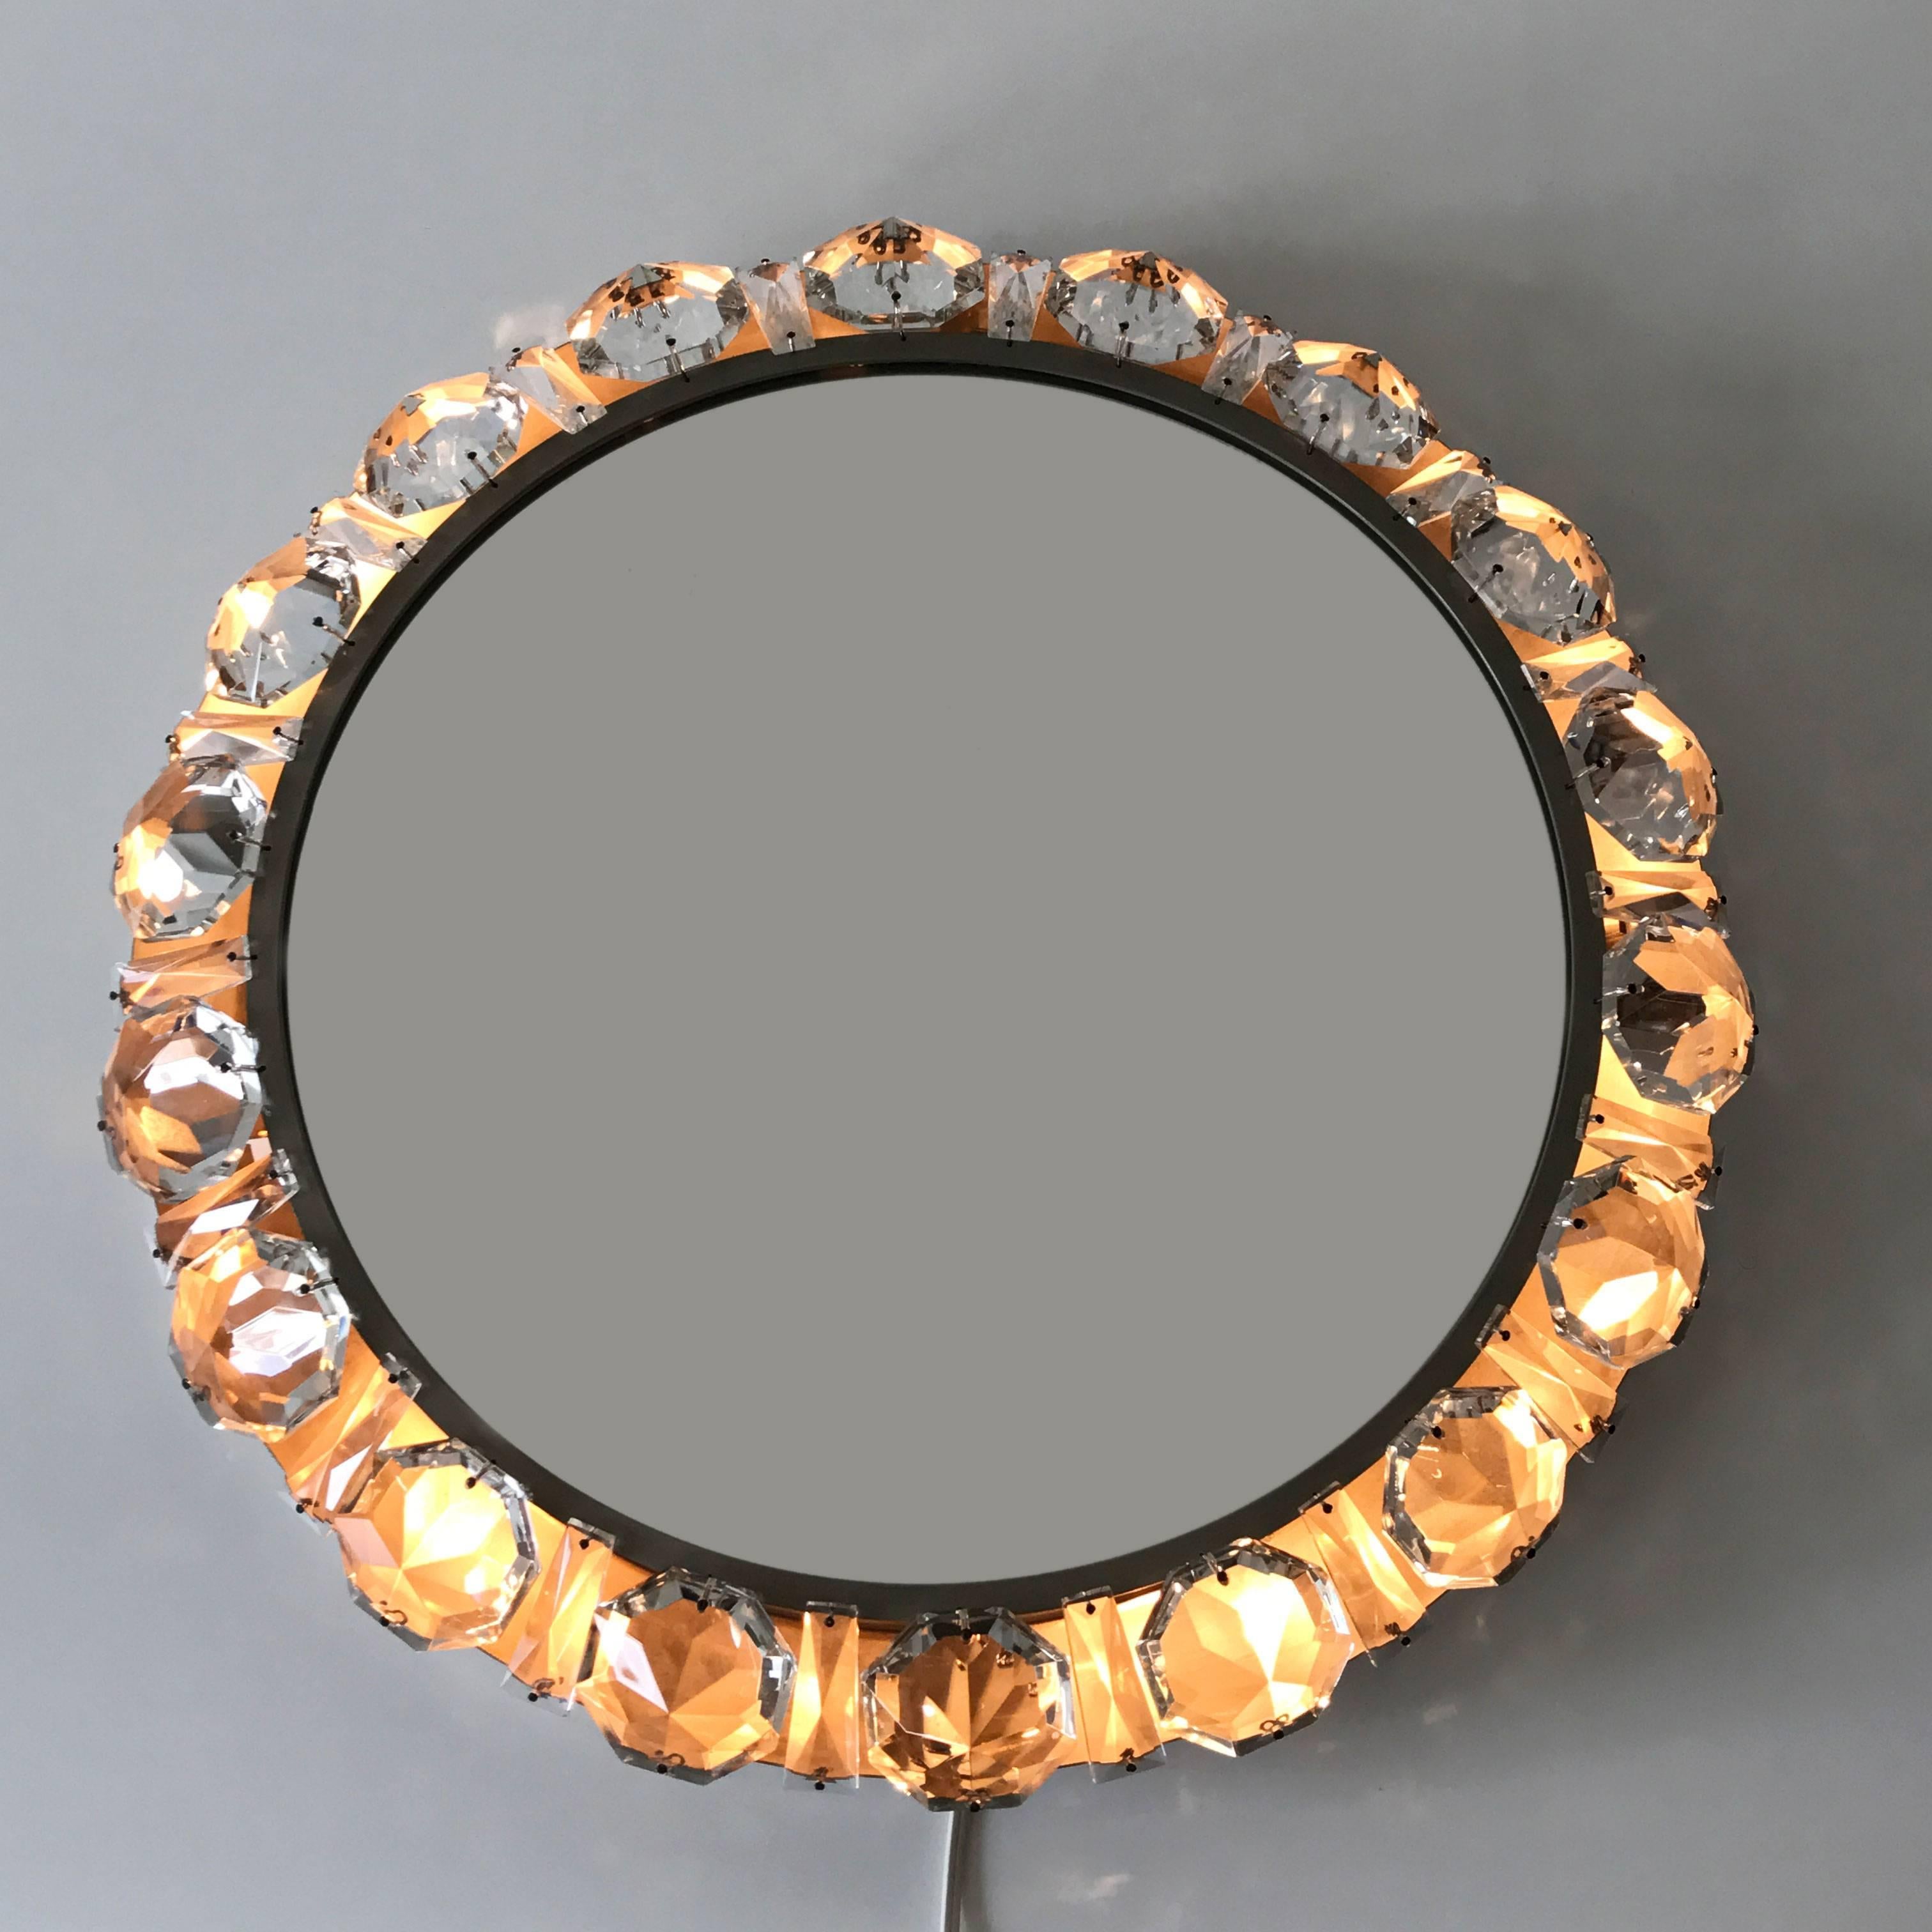 Highly decorative Mid Century Modern backlit wall mirror with a nickel-plated brass frame and large crystal elements. Designed and manufactured by Palwa, Germany, 1960s. 

Executed in crystal glass elements, nickel-plated brass and mirrored glass,